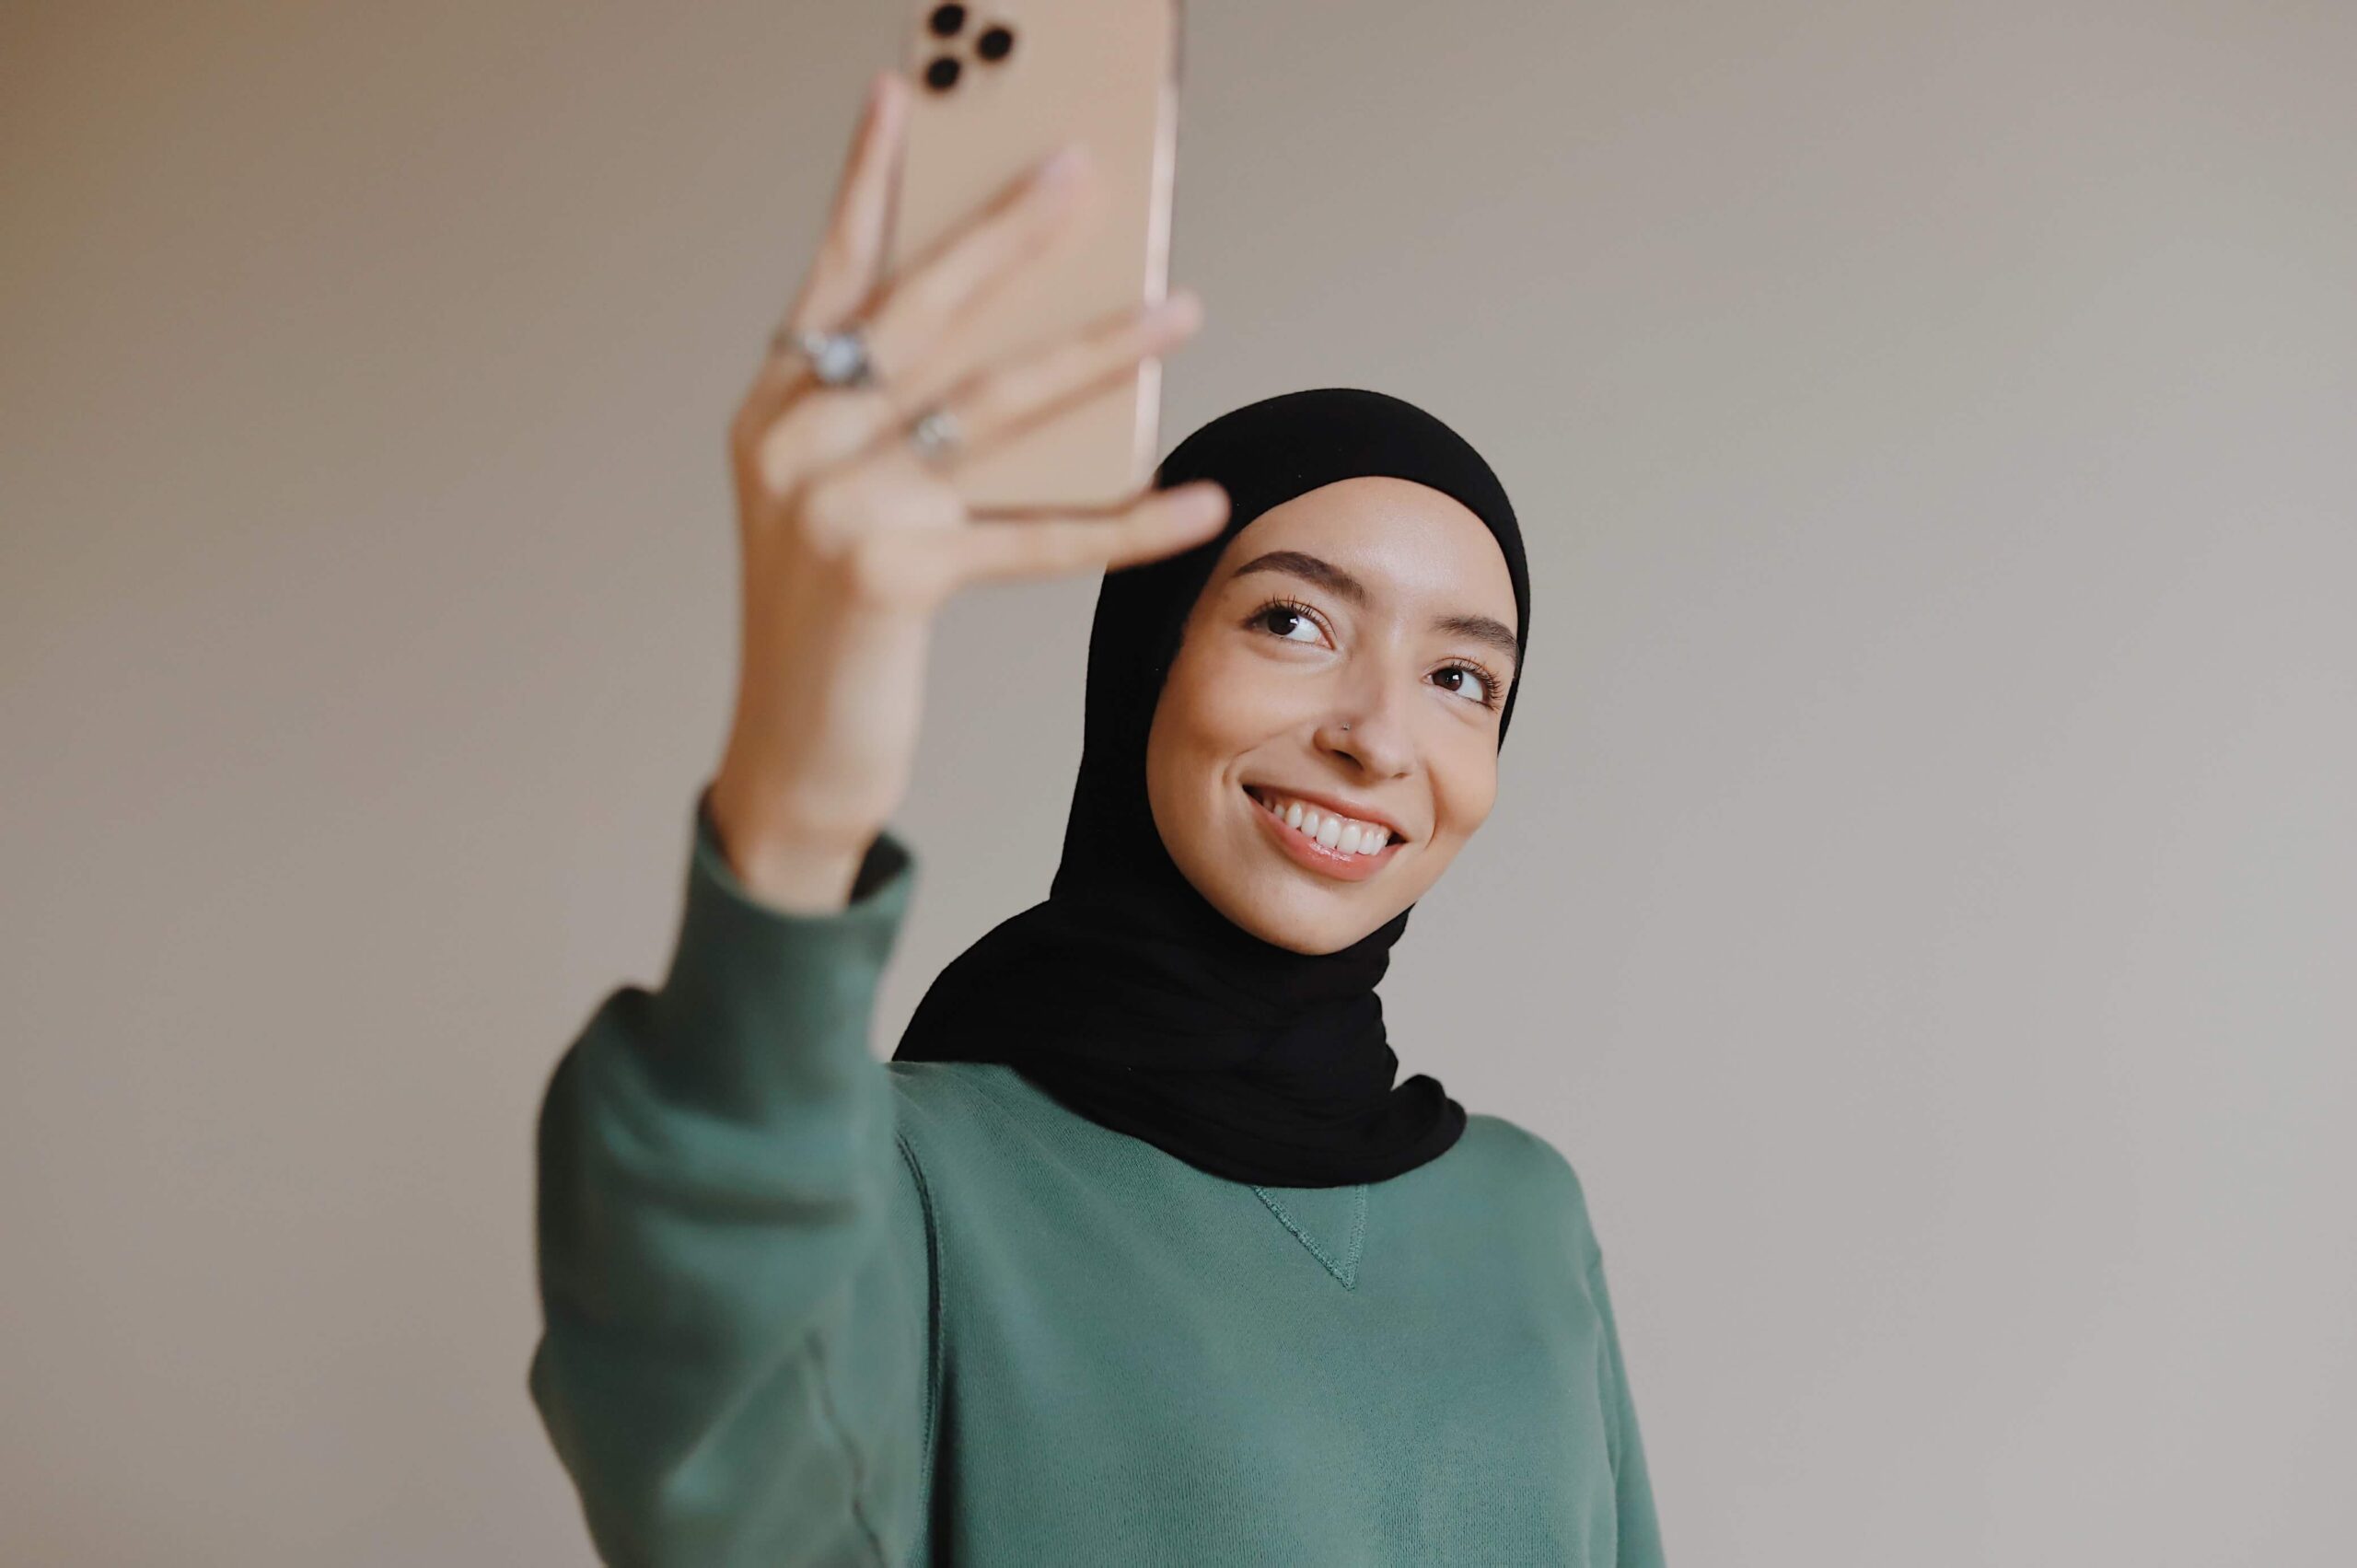 A woman holding a phone and taking a selfie.